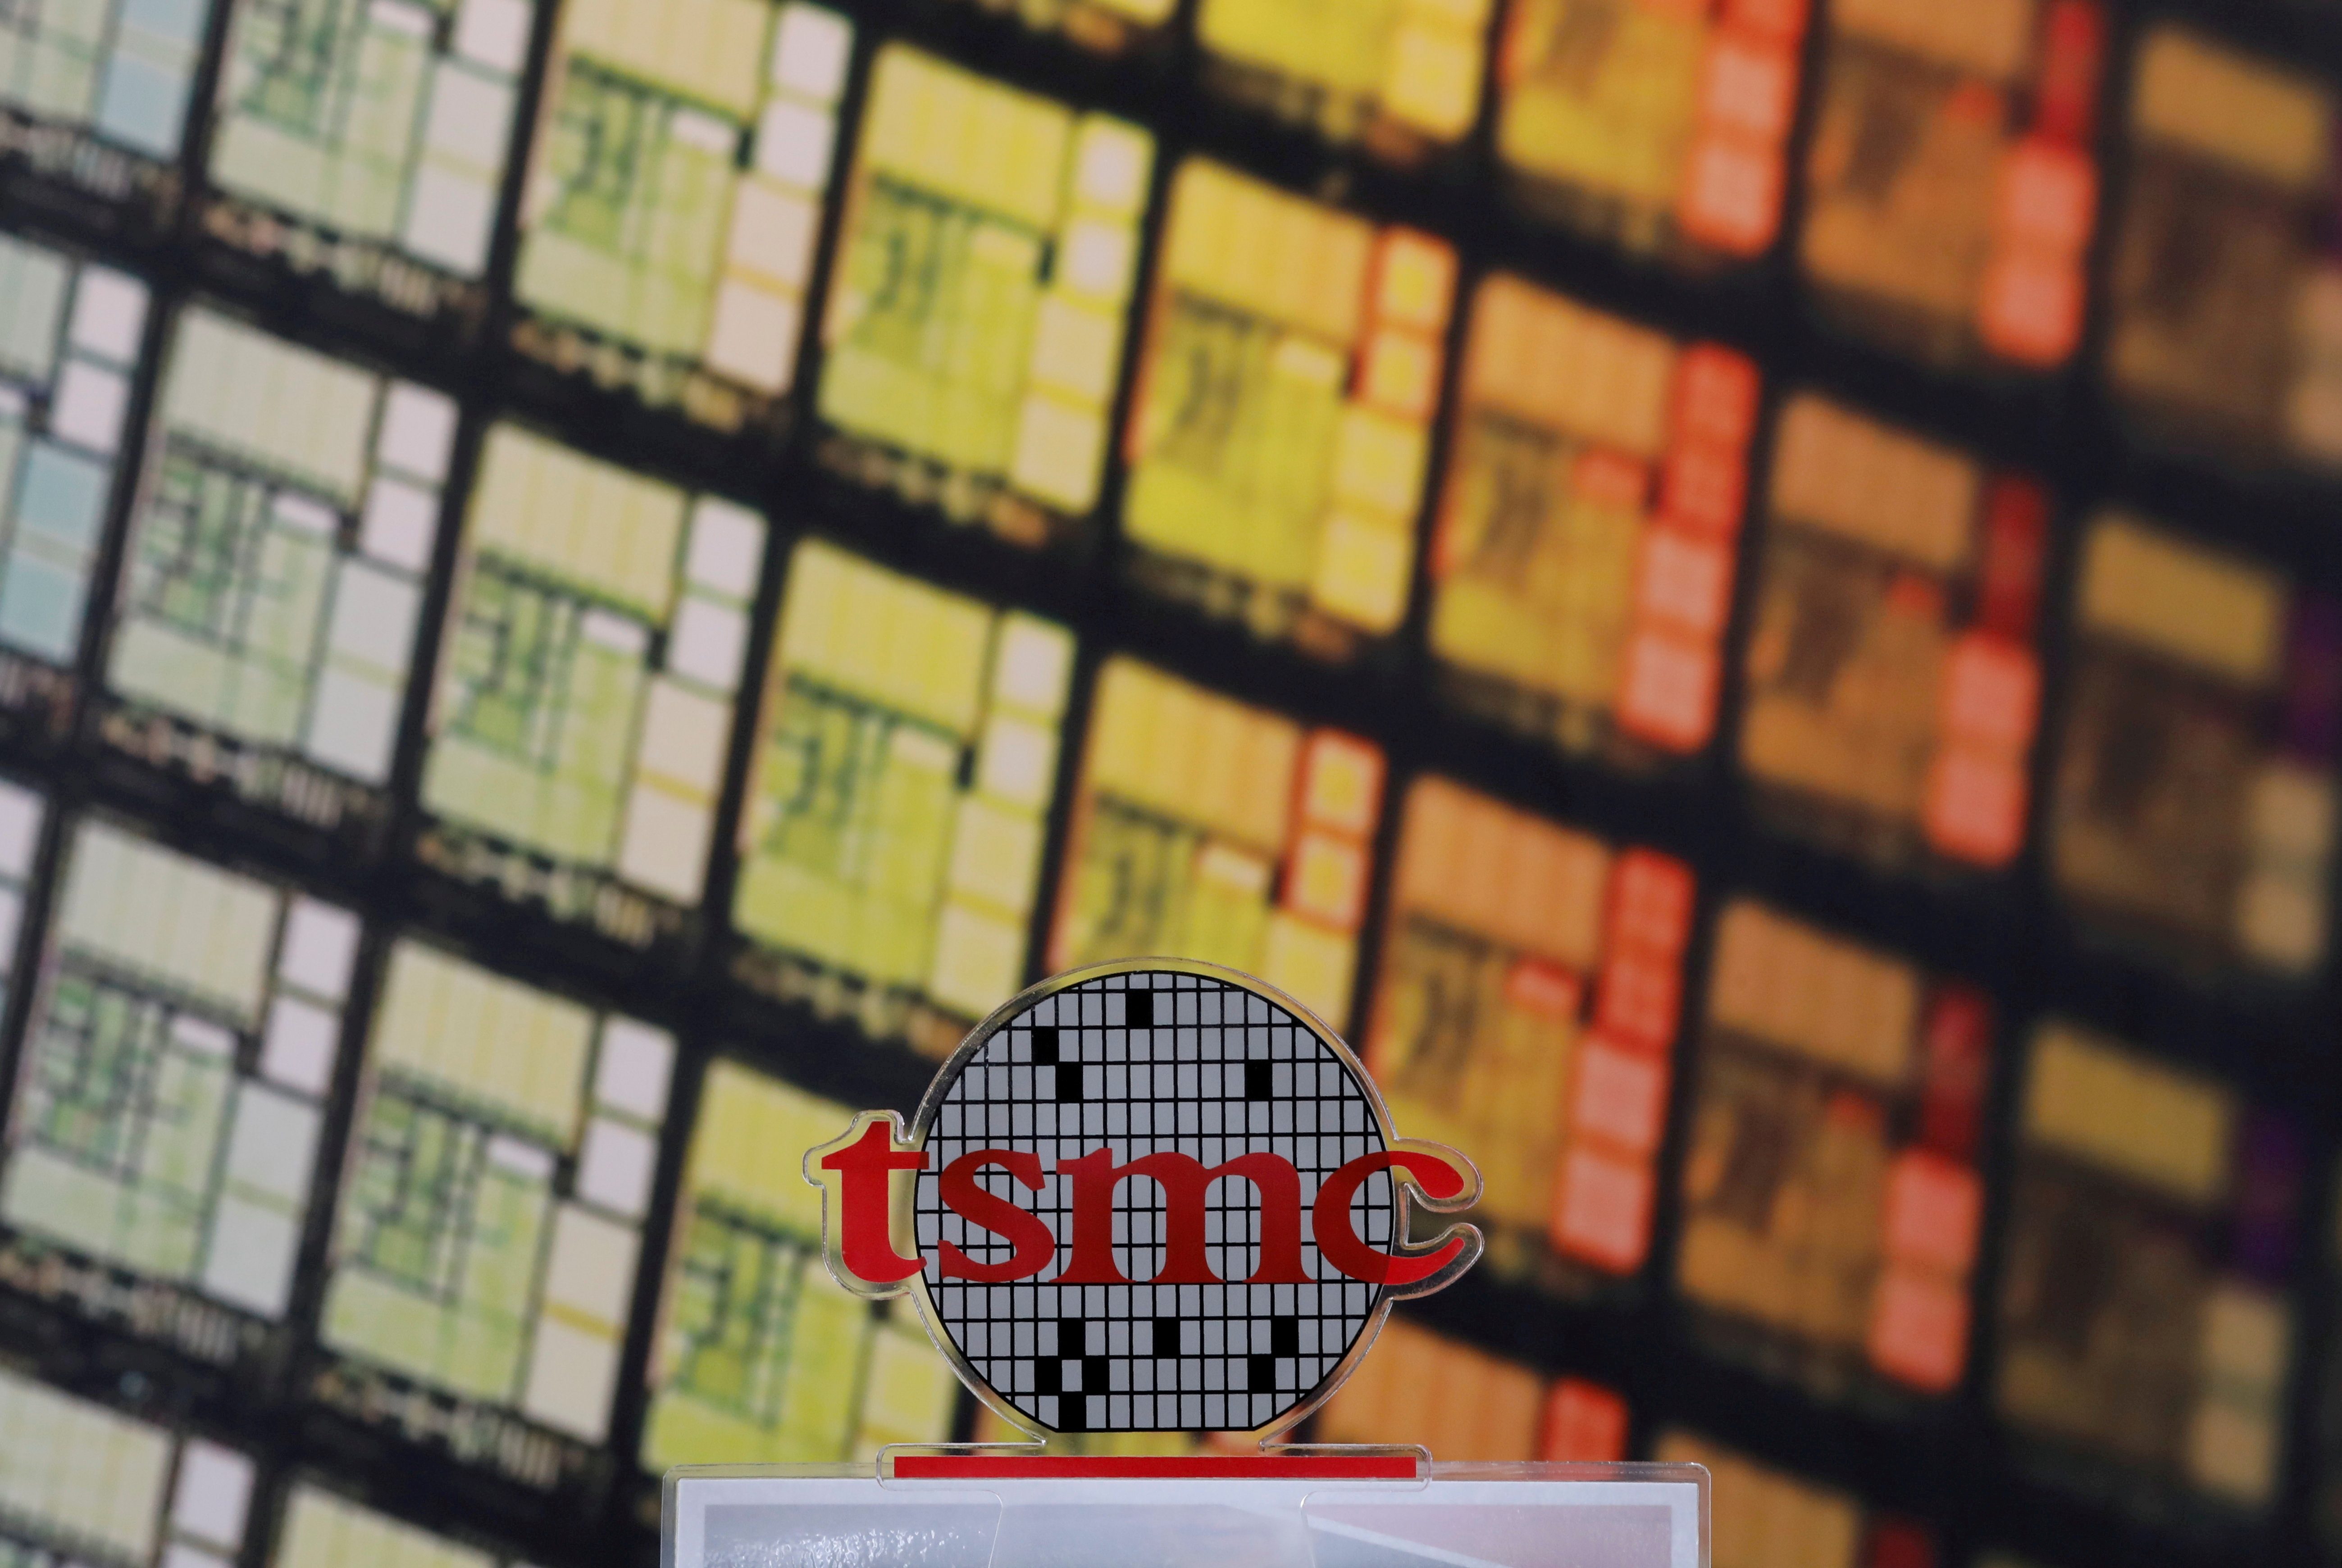 Chipmaker TSMC eyeing expansion of planned Arizona plant – sources